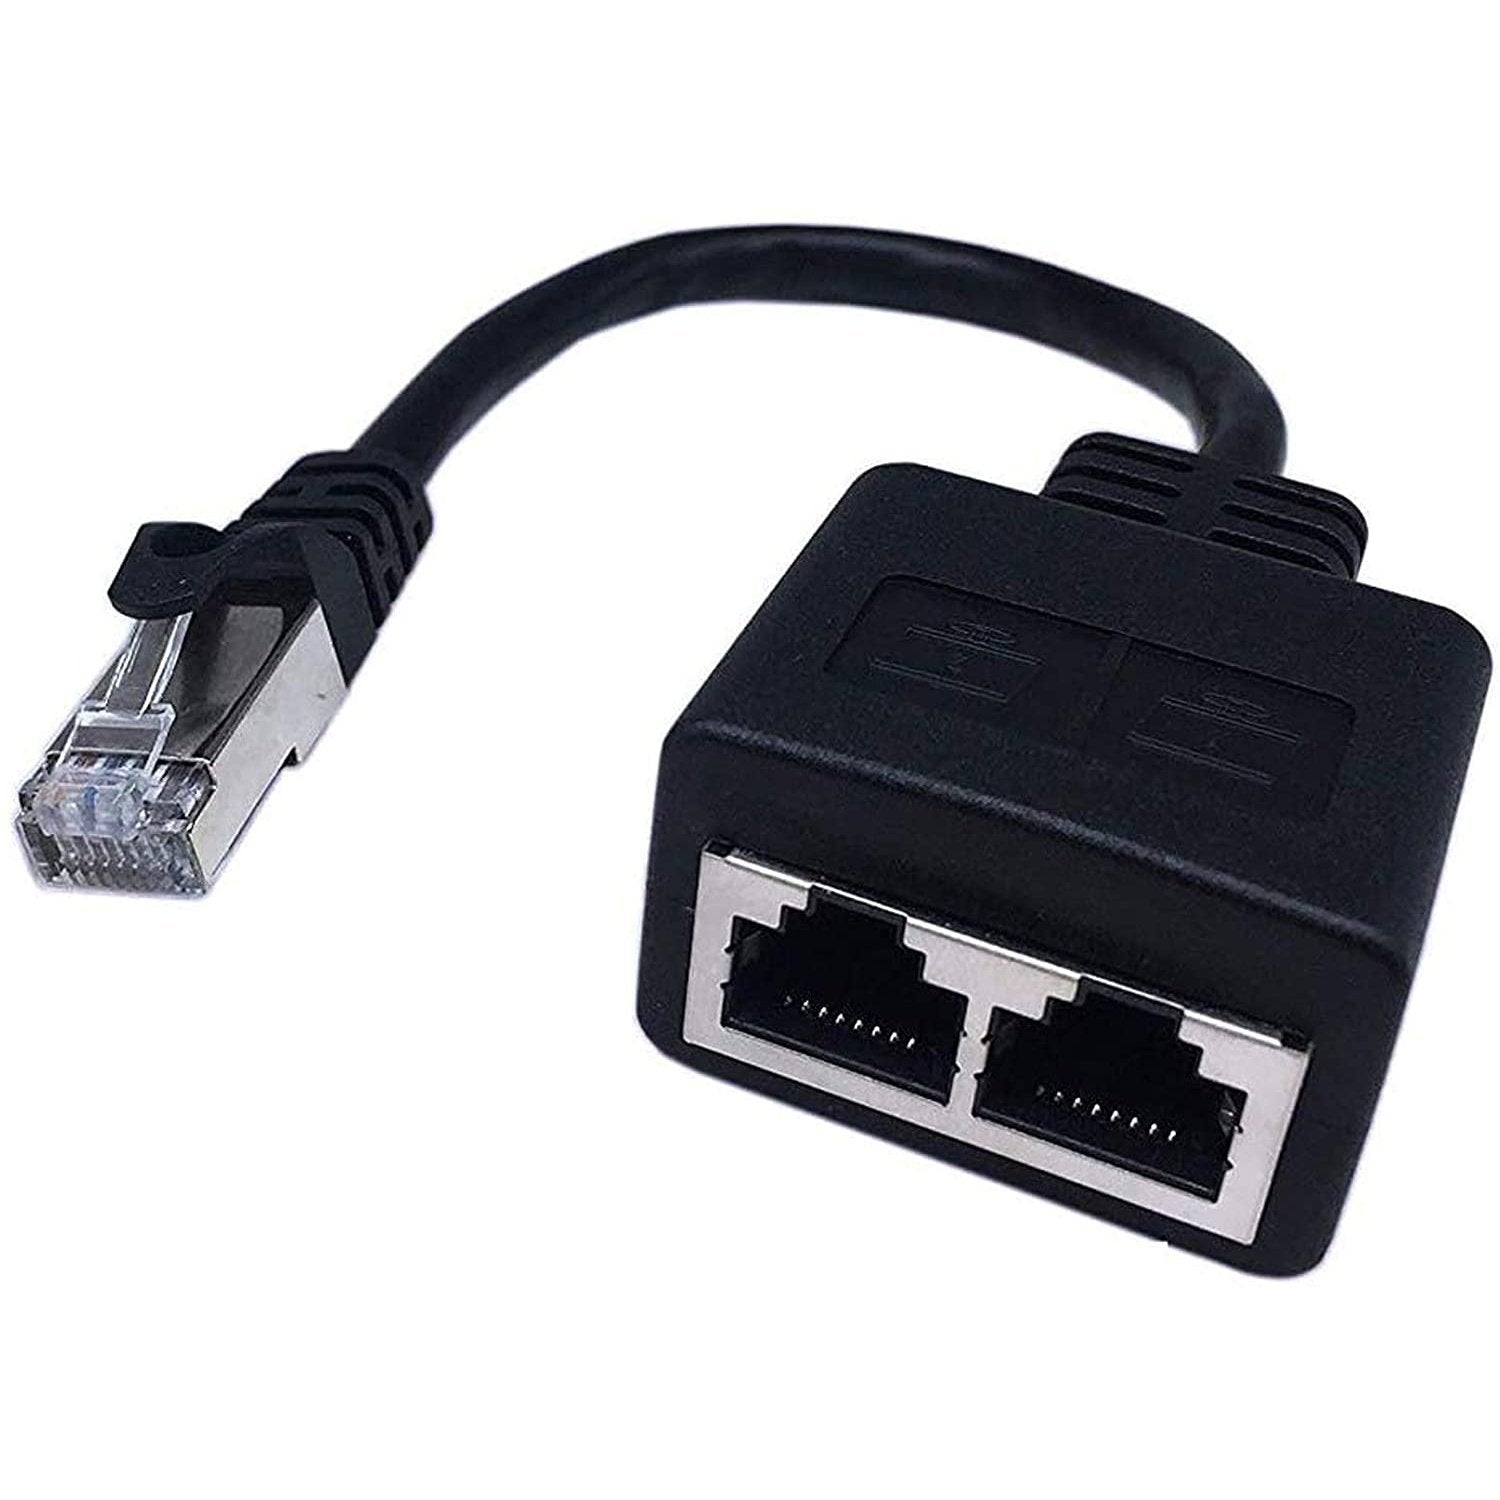 RJ45 Network 1 to 3 Port Ethernet Adapter Splitter Cable Male To 3 Female  LAN High Speed Cord 